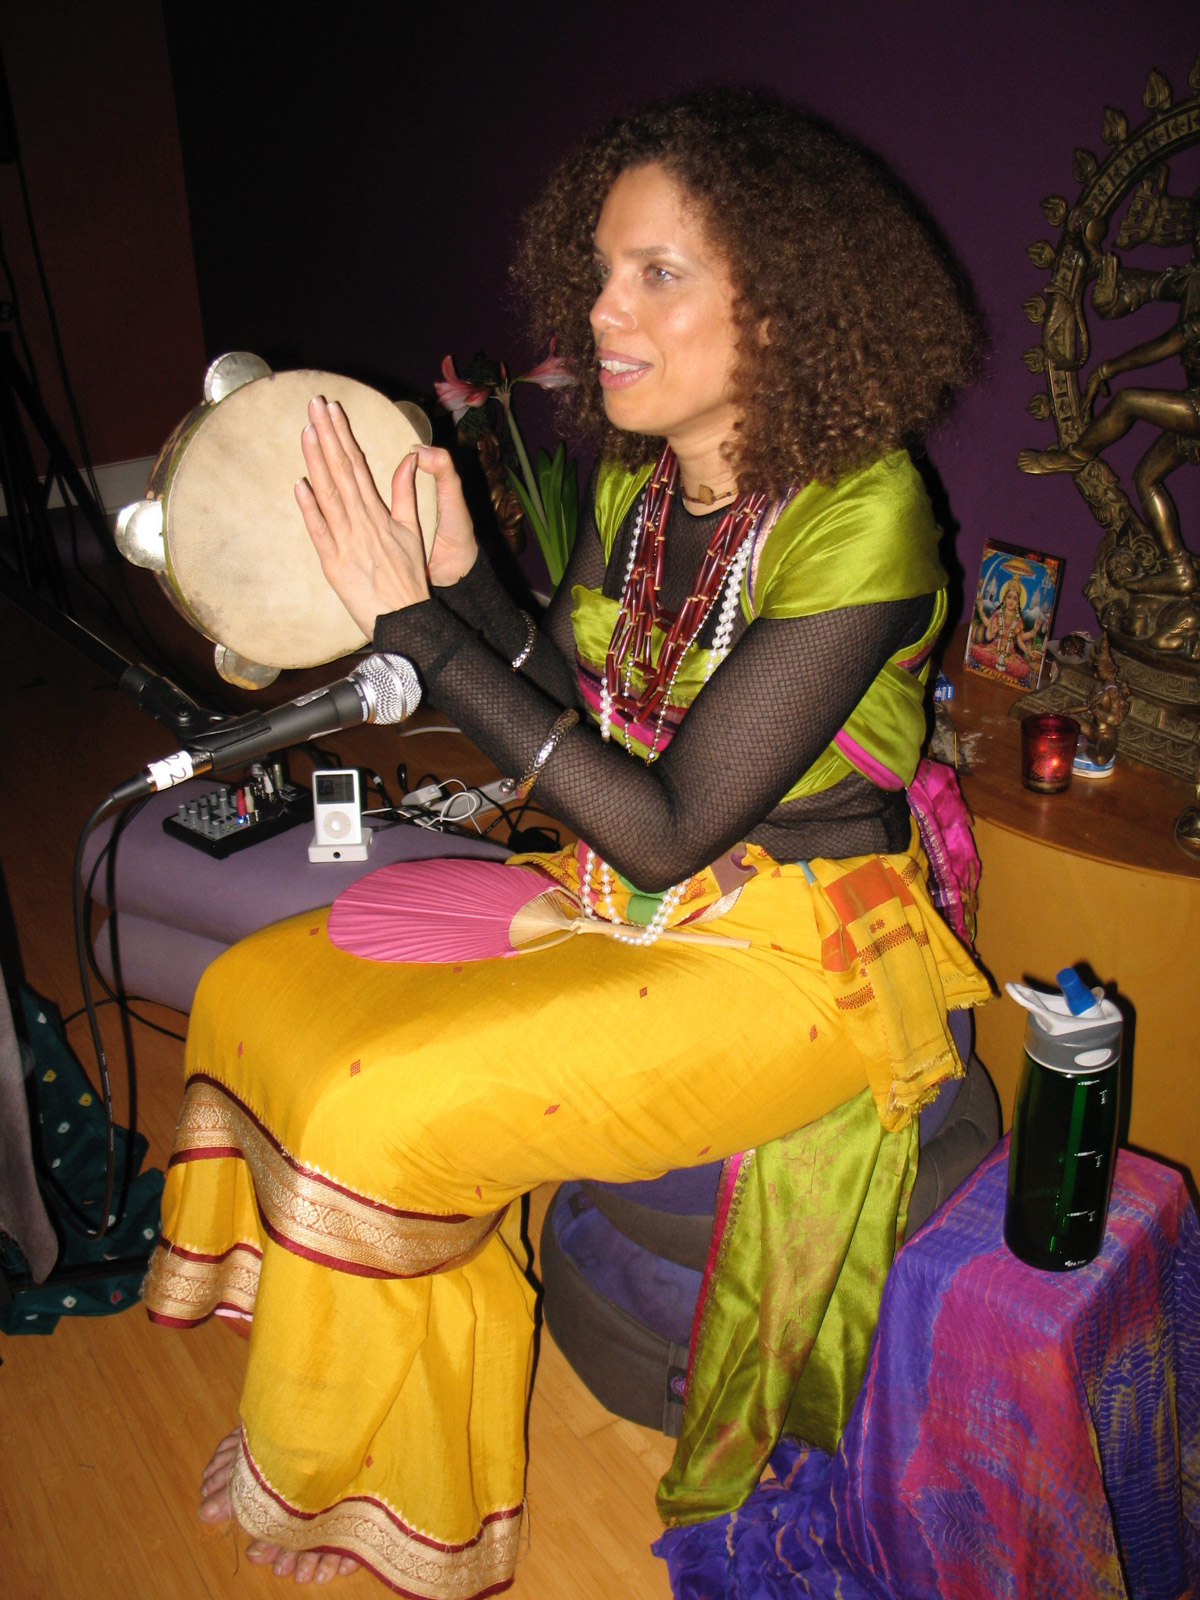 Singer Songwriter Ekayani, creator of Yoga on the Dance Floor, performing at Mystic Yoga Shala after her event at Mystic Independent Theater, photo by Casey Cyr Gash.